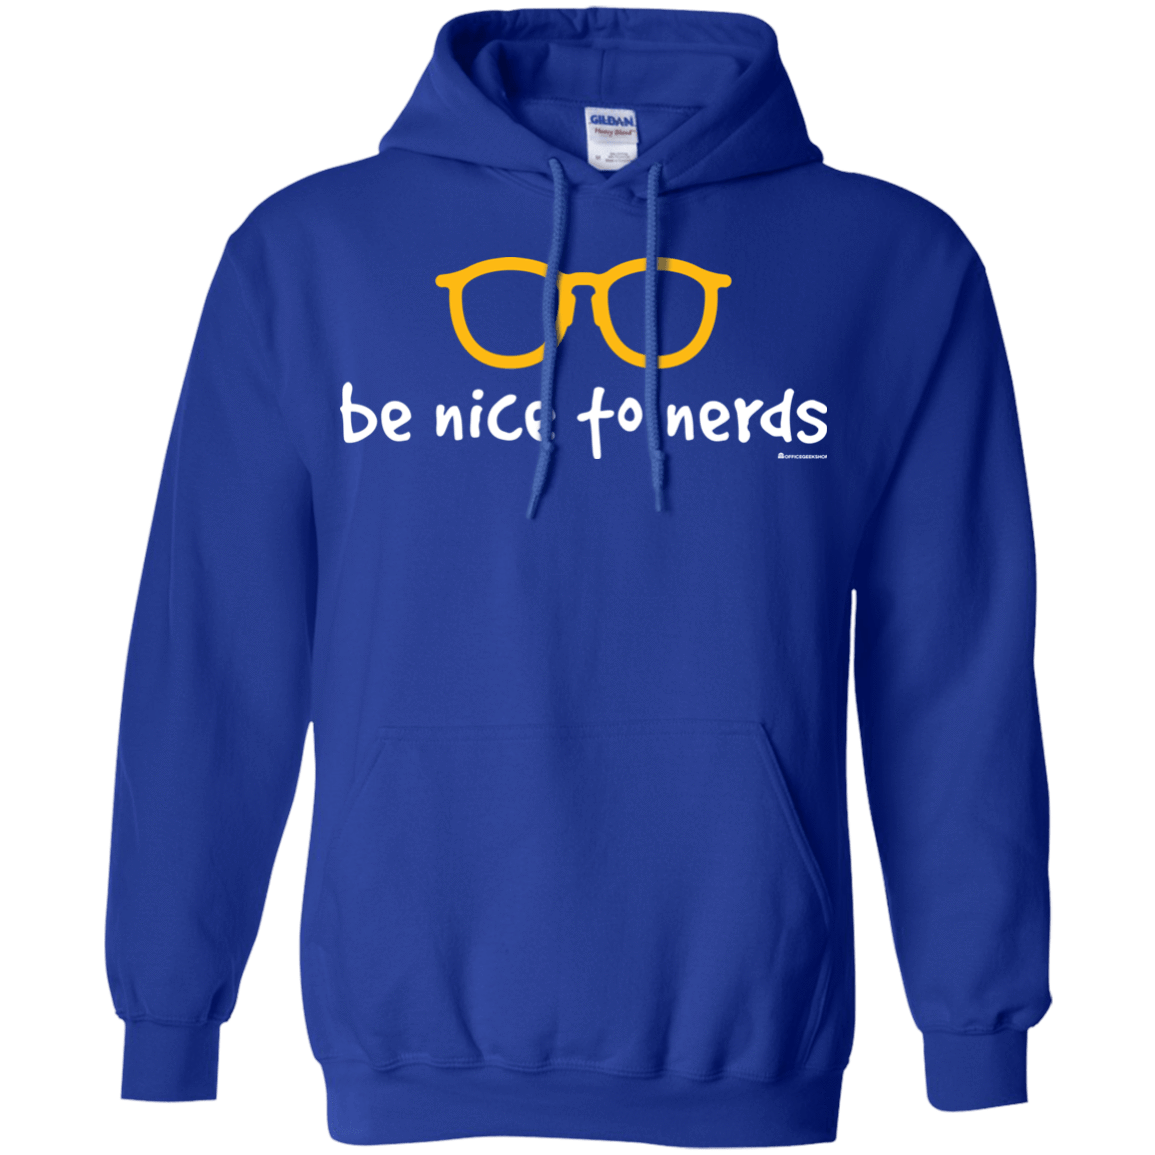 Sweatshirts Royal / Small Be Nice To Nerds Pullover Hoodie